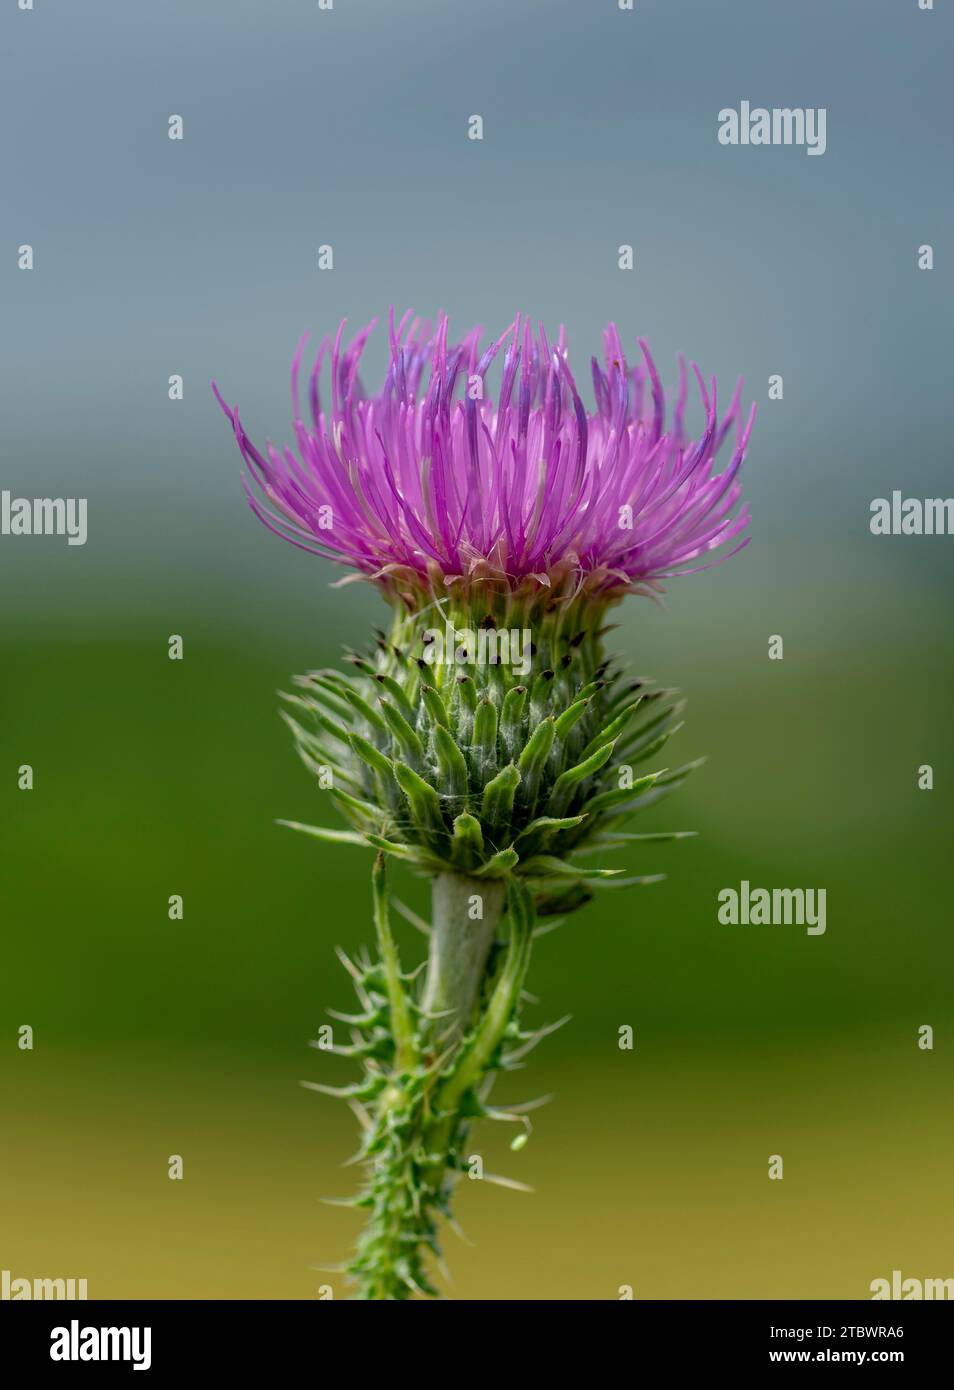 Carduus crispus, the curly plumeless thistle or welted thistle purple flower Stock Photo